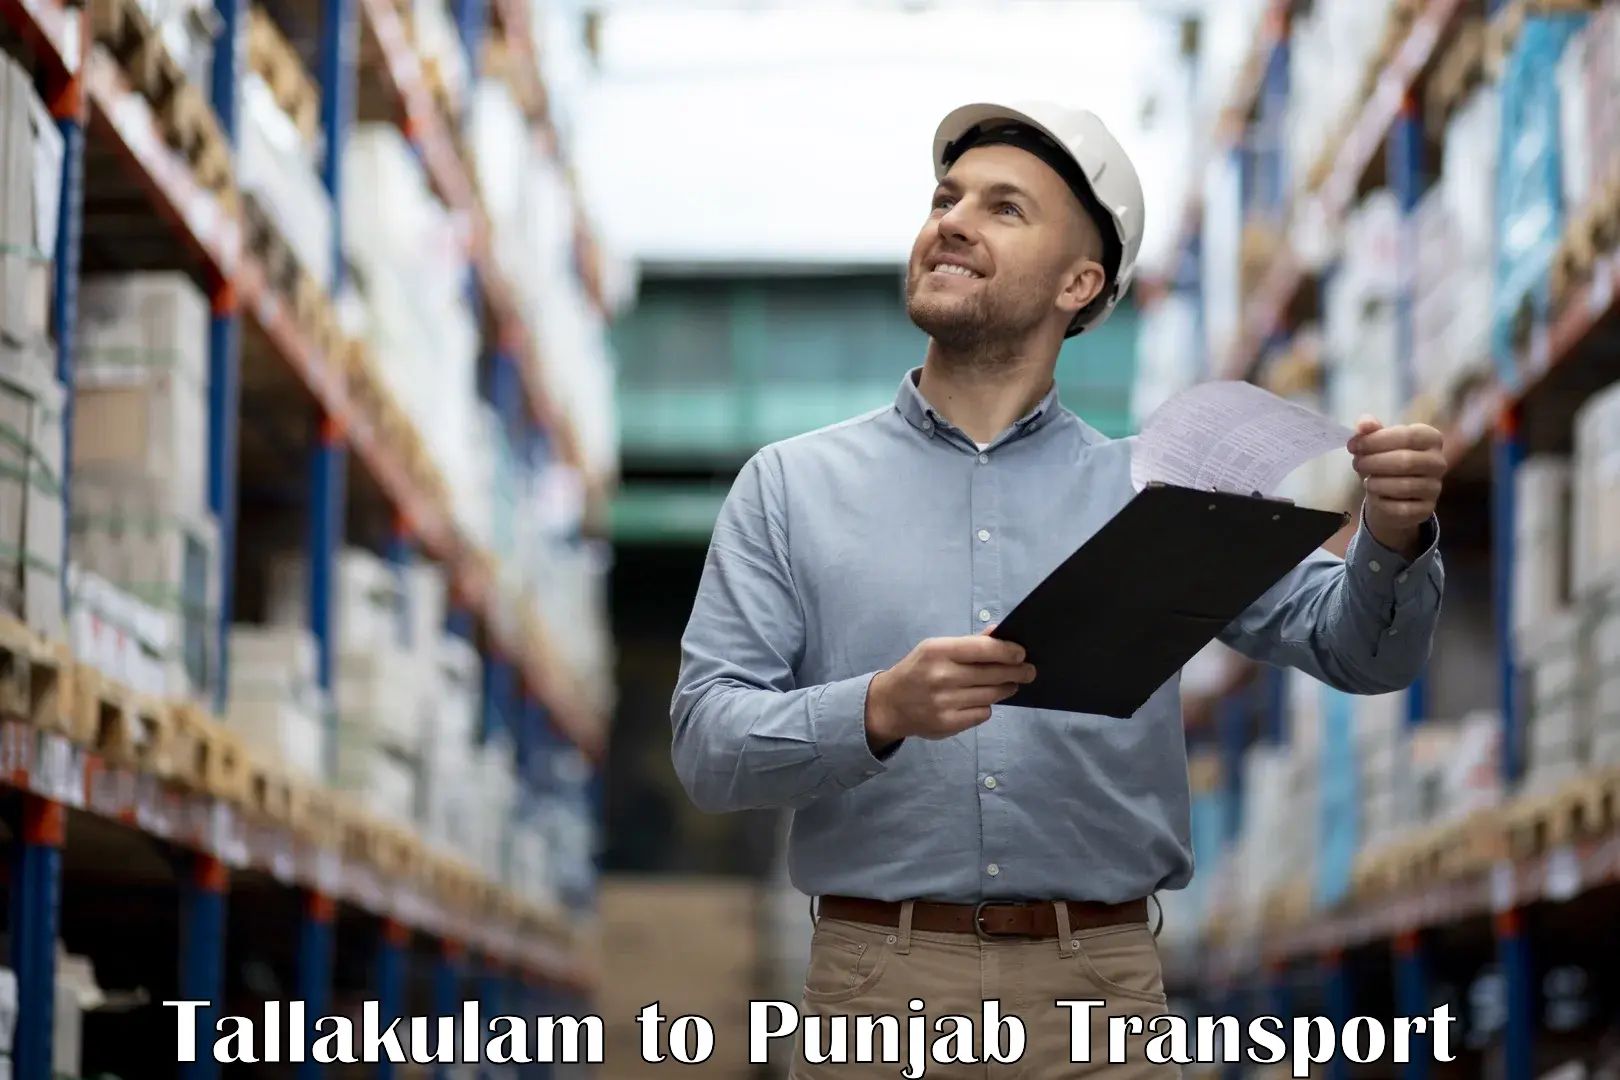 Road transport online services Tallakulam to Patiala